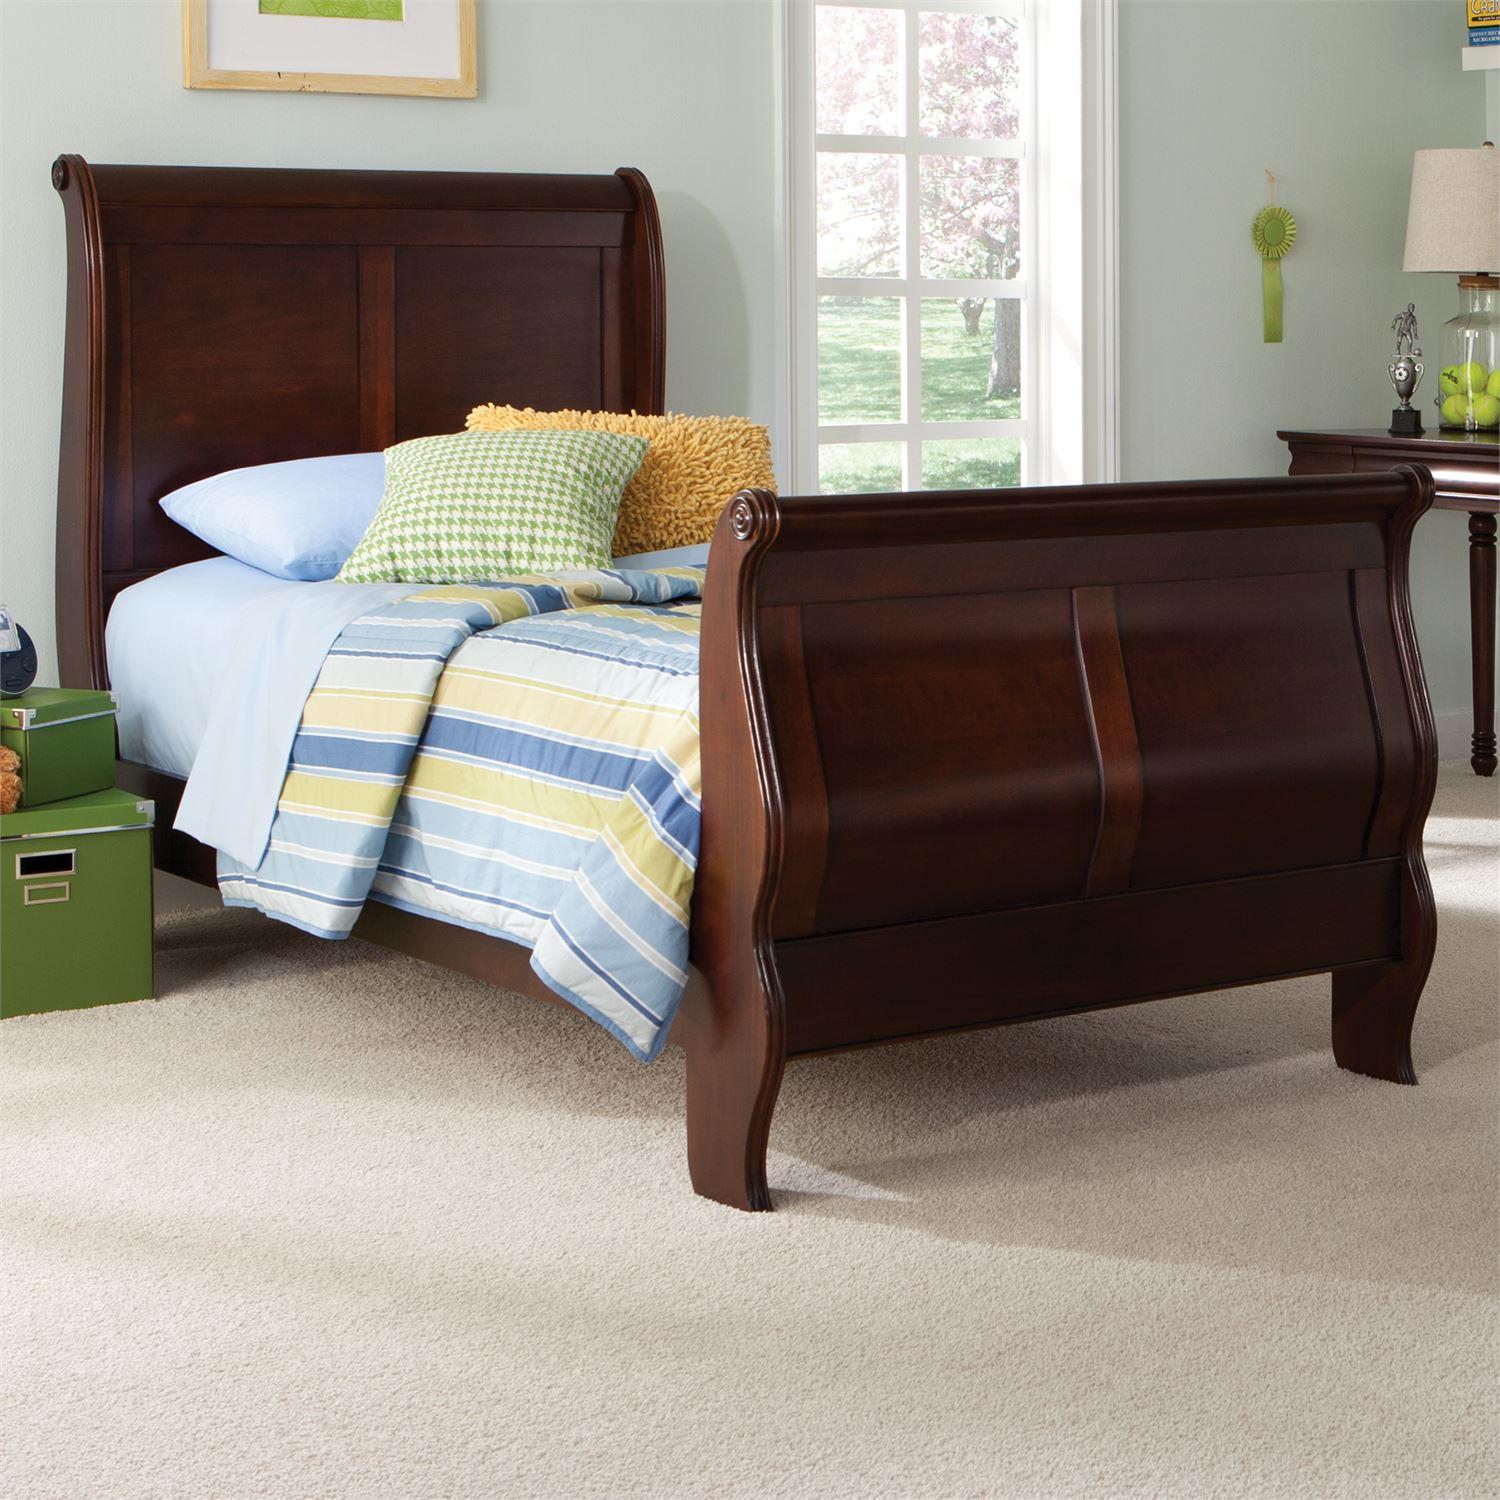 

    
Mahogany Stain Finish Twin Sleigh Bedroom Set 3 Pcs Carriage Court (709-YBR) Liberty Furniture
